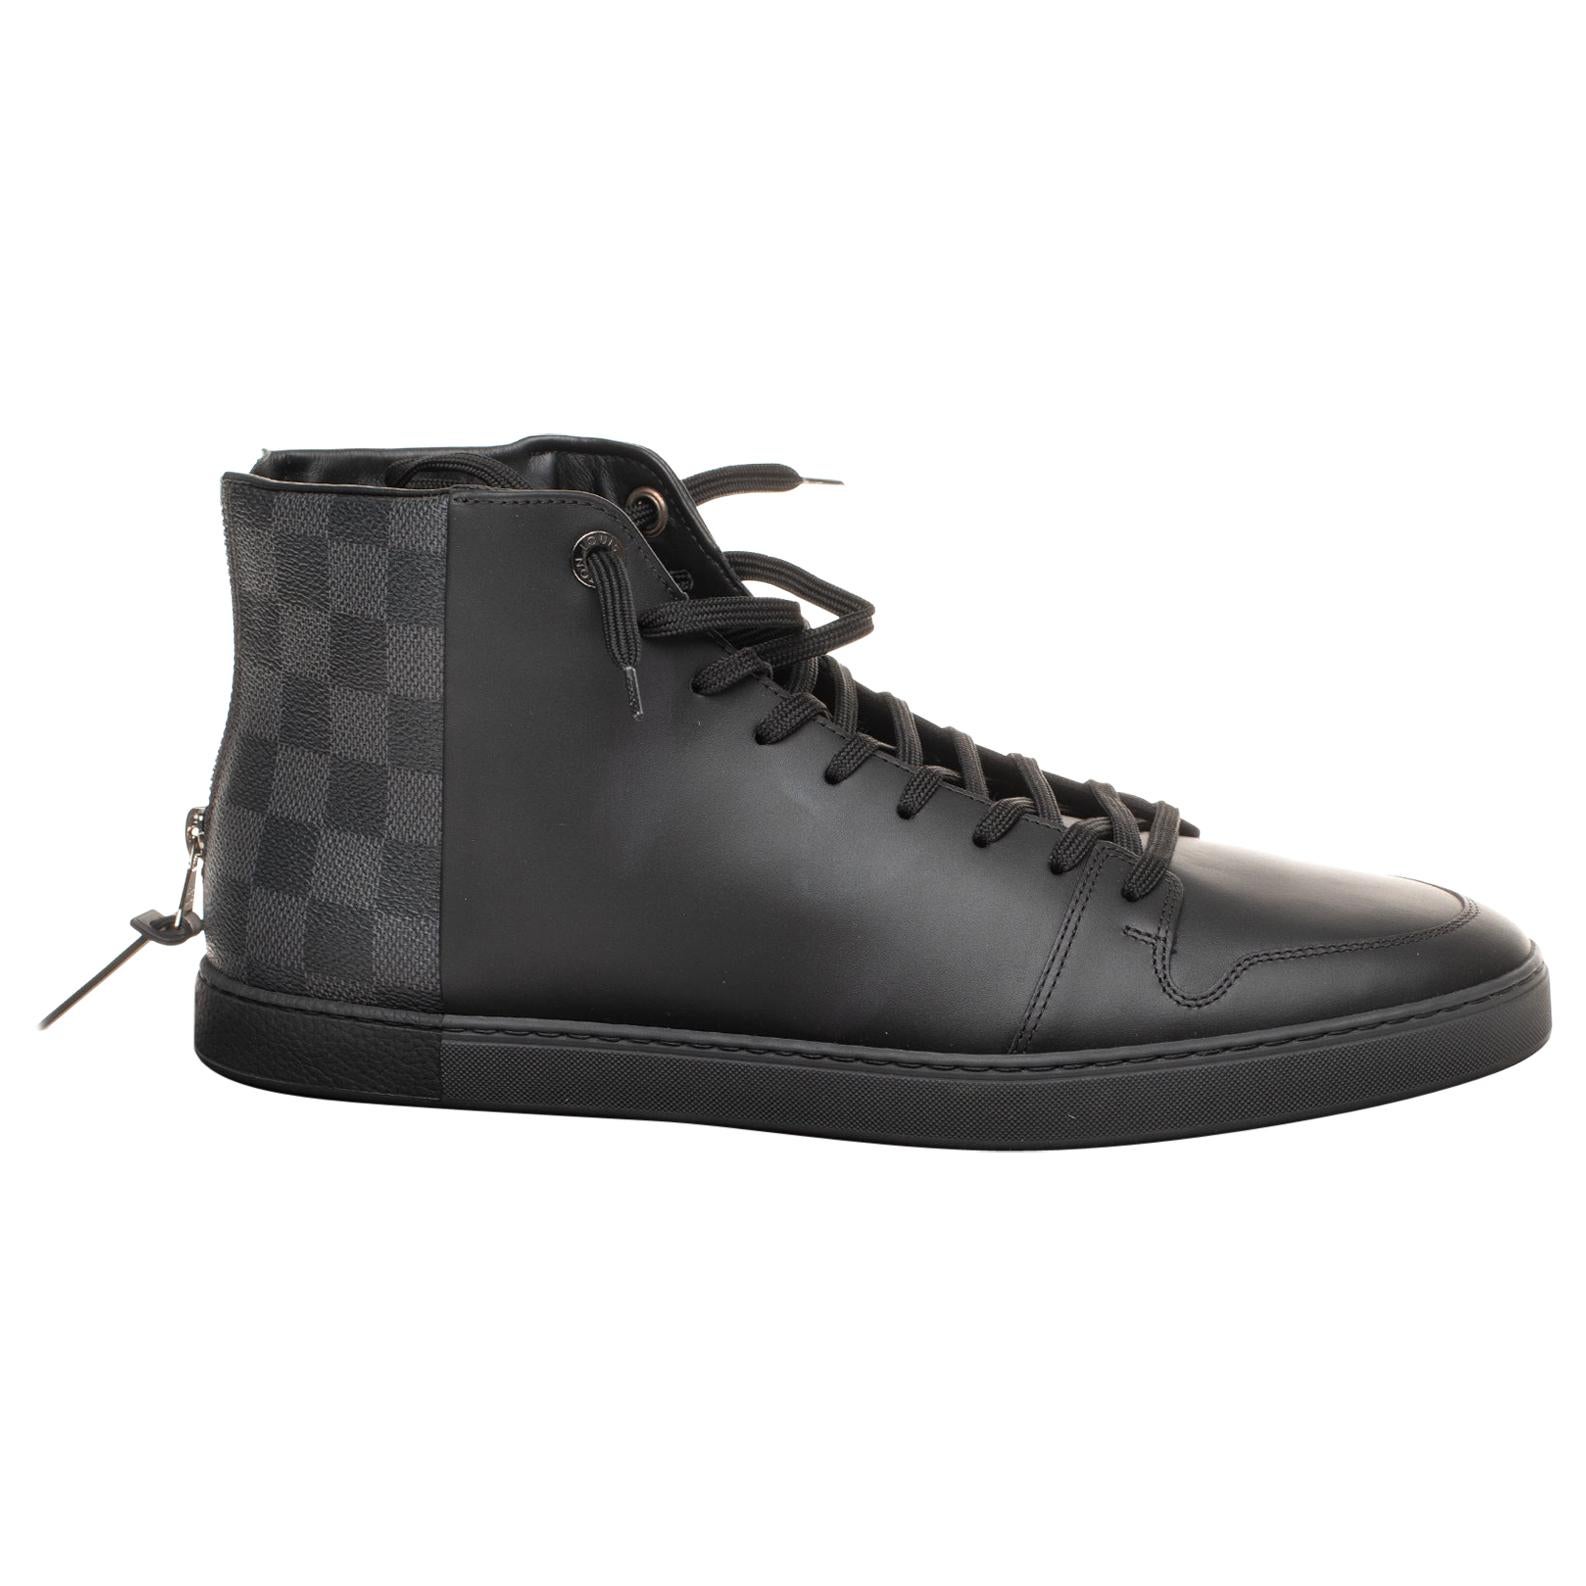 Louis Vuitton Sneaker Boot - 2 For Sale on 1stDibs